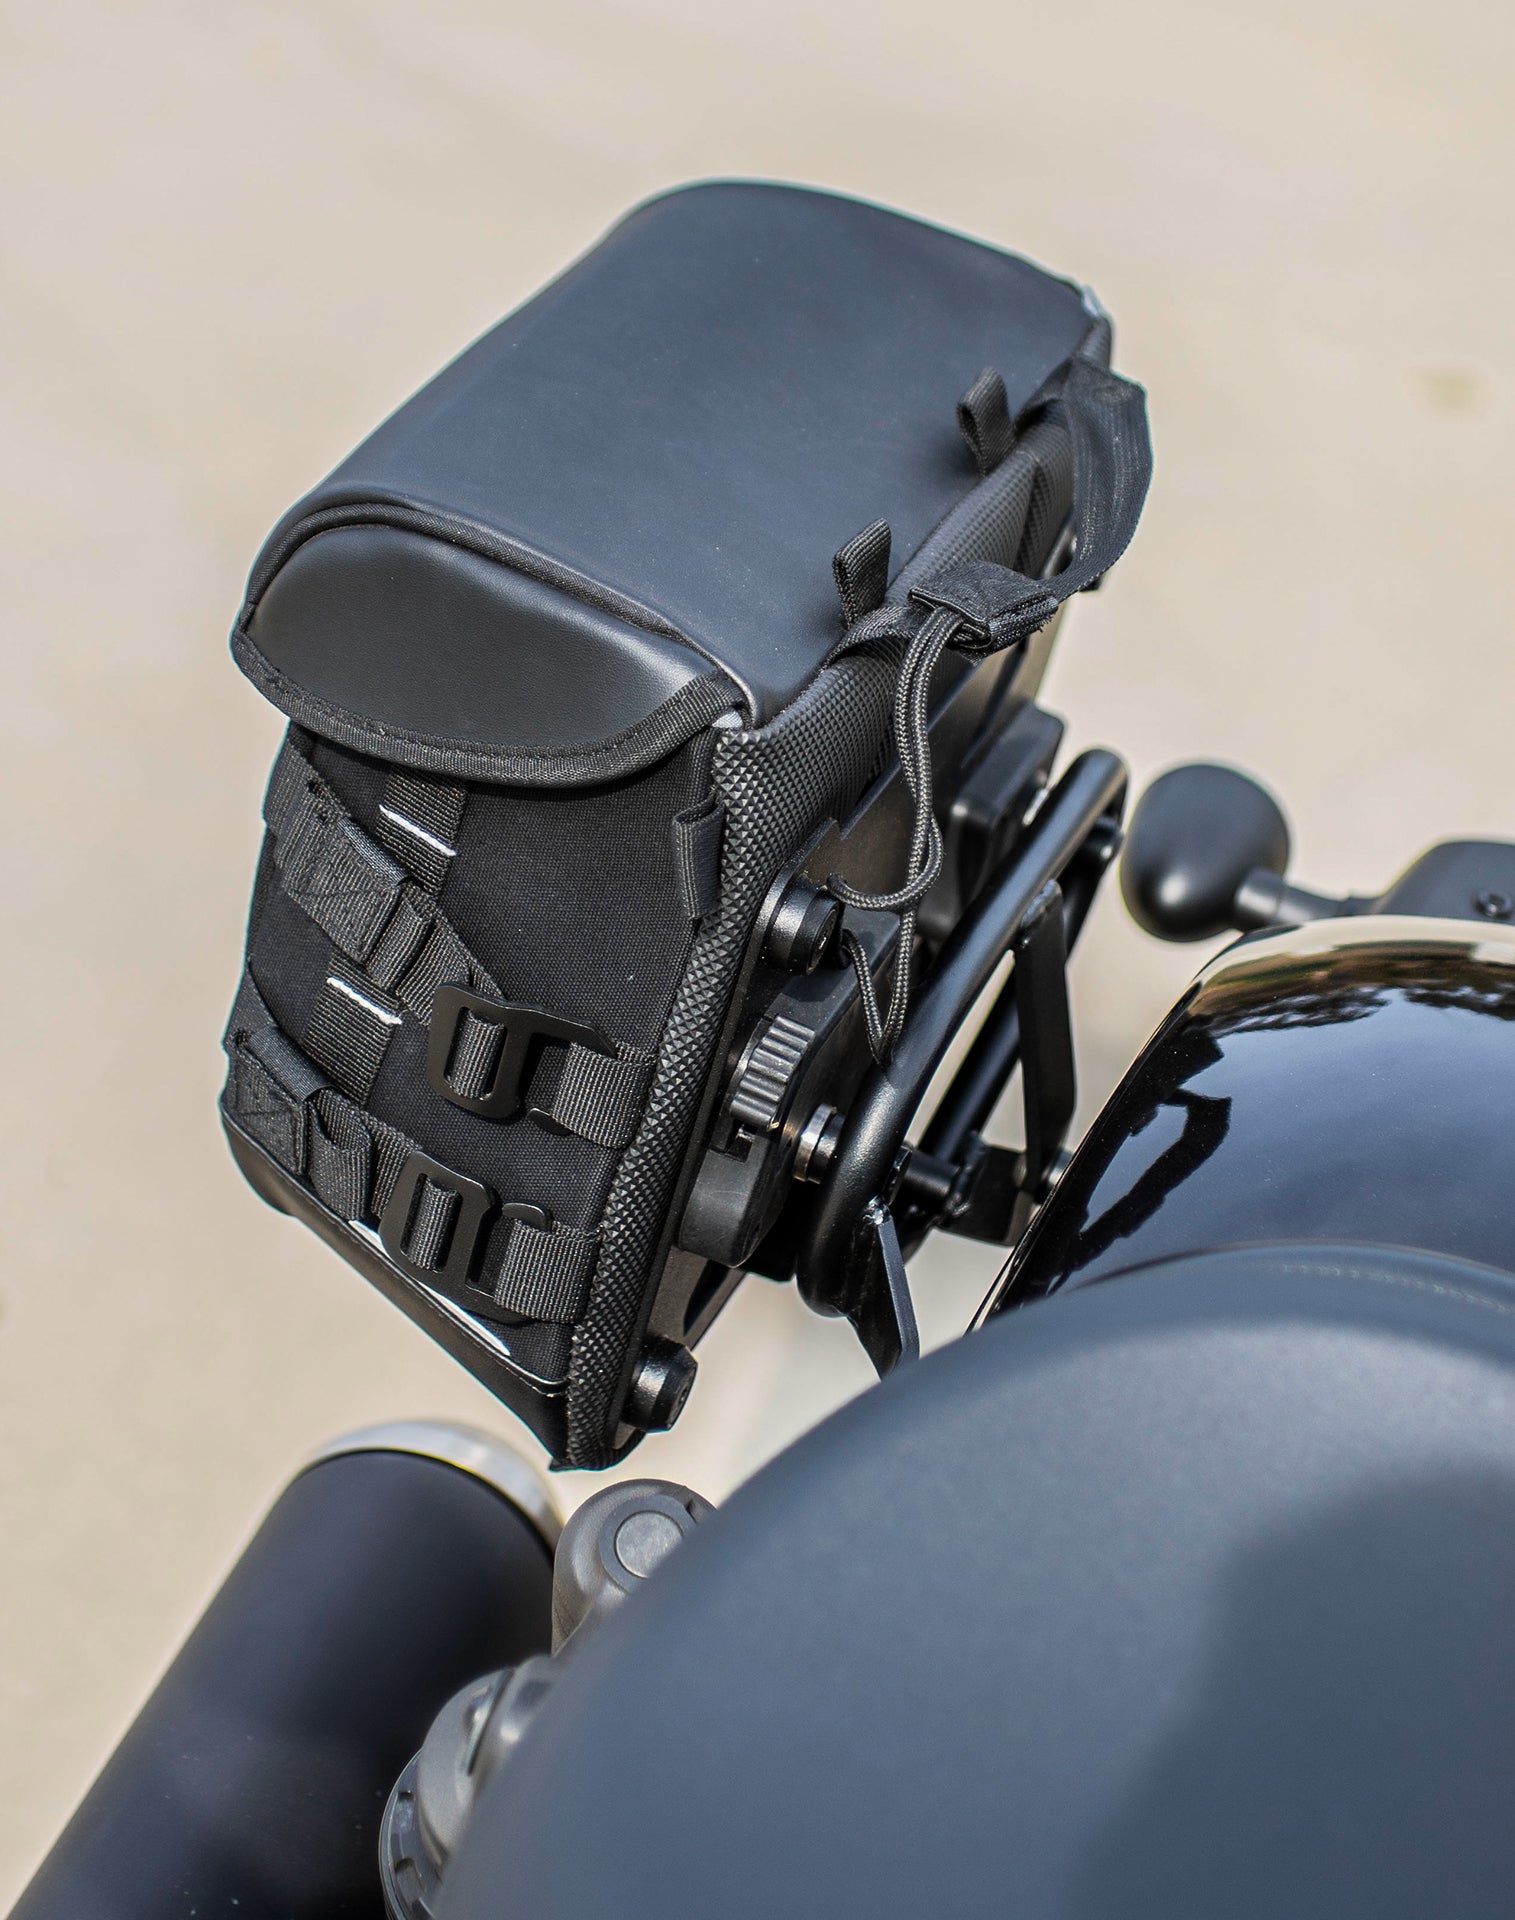 10L - Incognito Quick Mount Small Honda Rebel 1100 Solo Motorcycle Saddlebag (Right Only)